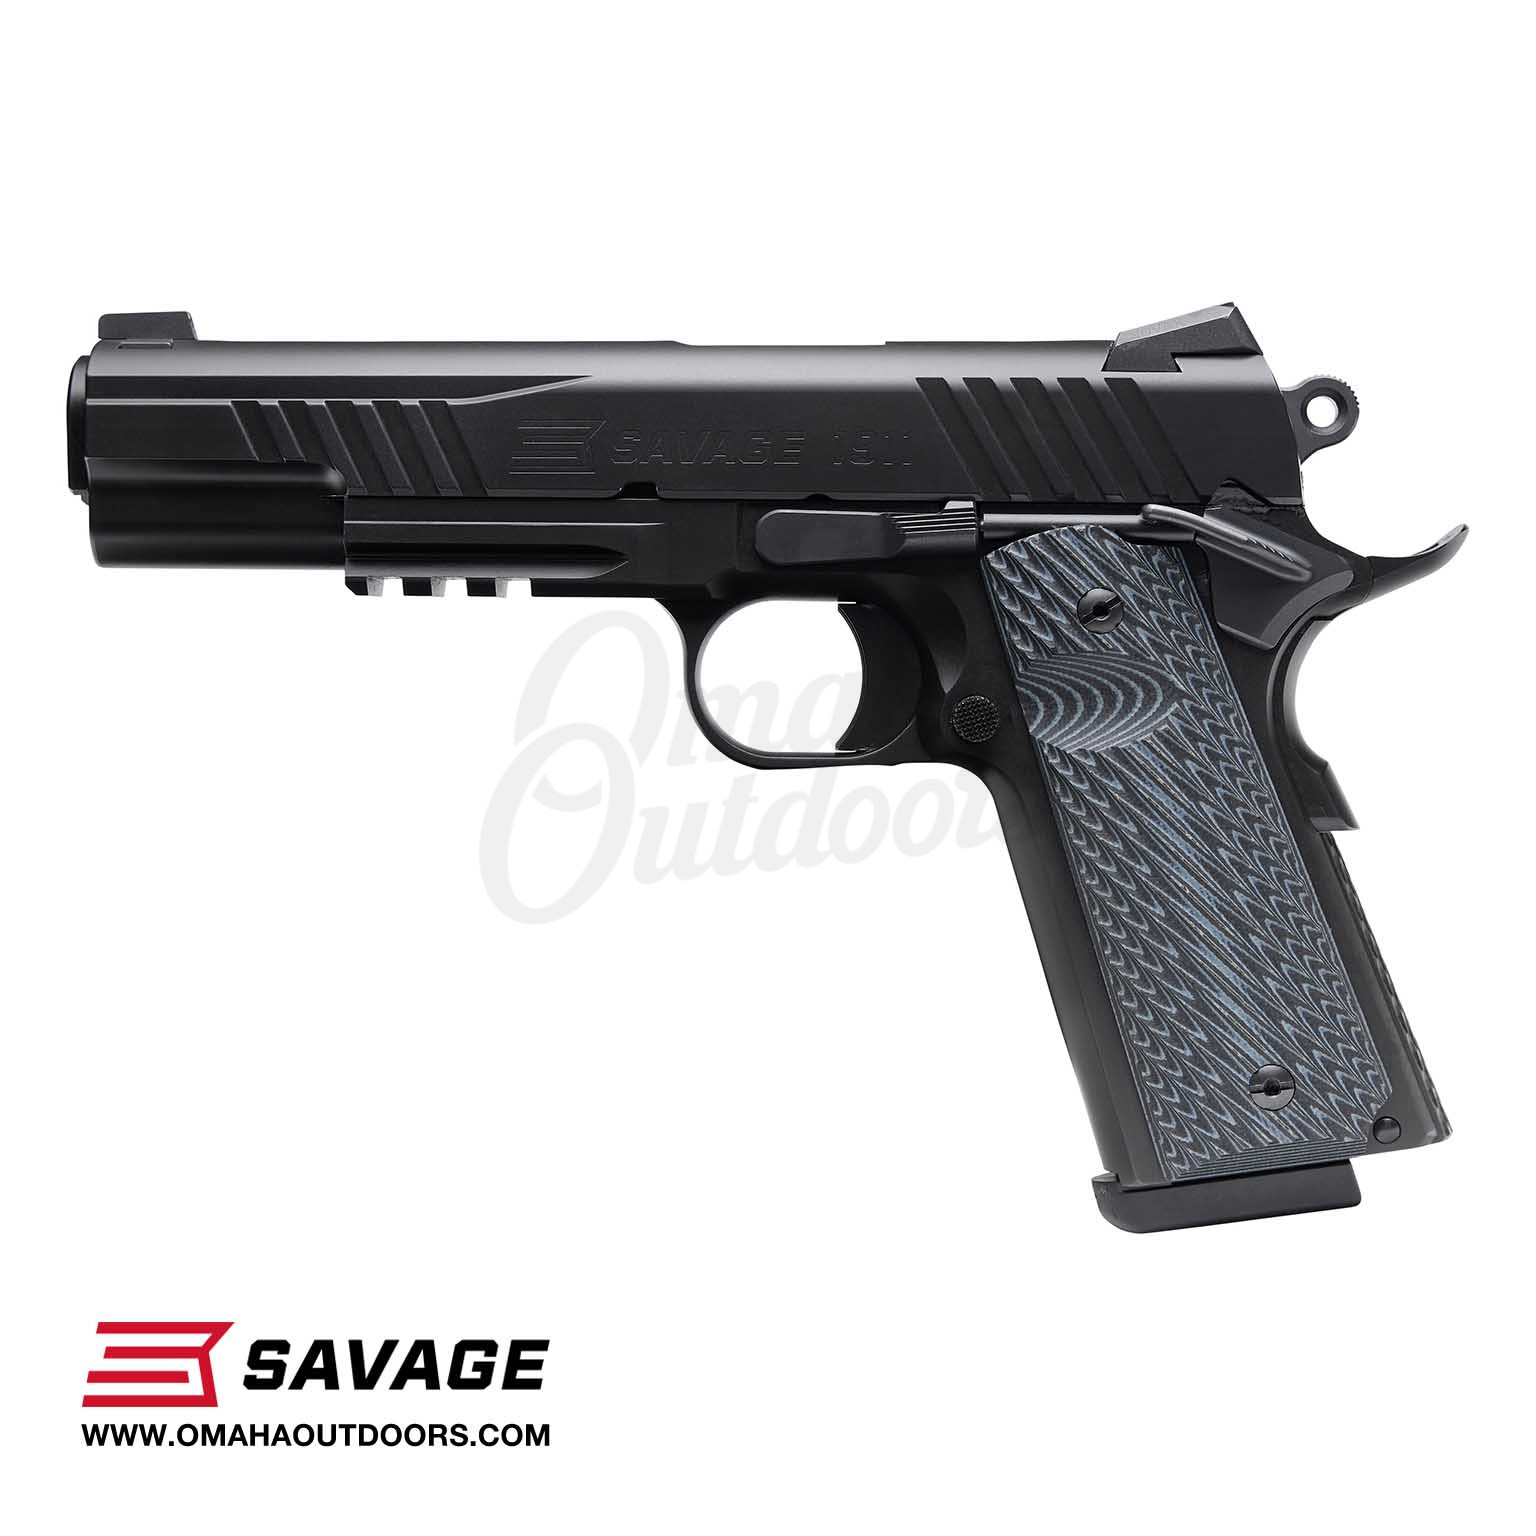 Guuun G10 Grip for Tanfoglio Small Frame, Custom Tactical Grips